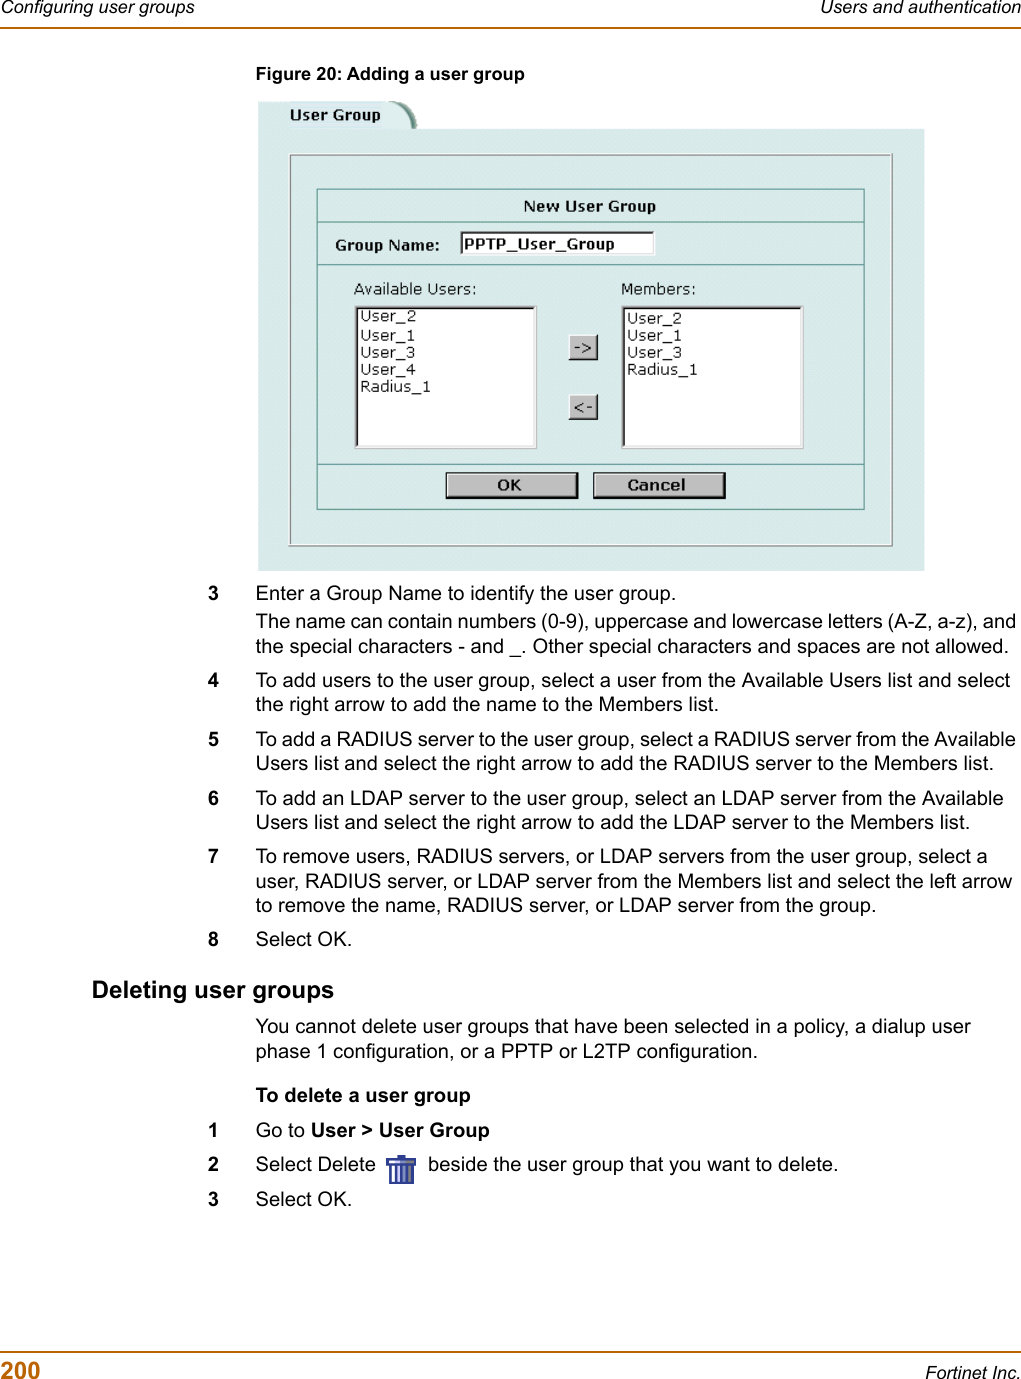 200 Fortinet Inc.Configuring user groups Users and authenticationFigure 20: Adding a user group3Enter a Group Name to identify the user group.The name can contain numbers (0-9), uppercase and lowercase letters (A-Z, a-z), and the special characters - and _. Other special characters and spaces are not allowed.4To add users to the user group, select a user from the Available Users list and select the right arrow to add the name to the Members list.5To add a RADIUS server to the user group, select a RADIUS server from the Available Users list and select the right arrow to add the RADIUS server to the Members list.6To add an LDAP server to the user group, select an LDAP server from the Available Users list and select the right arrow to add the LDAP server to the Members list.7To remove users, RADIUS servers, or LDAP servers from the user group, select a user, RADIUS server, or LDAP server from the Members list and select the left arrow to remove the name, RADIUS server, or LDAP server from the group.8Select OK.Deleting user groupsYou cannot delete user groups that have been selected in a policy, a dialup user phase 1 configuration, or a PPTP or L2TP configuration.To delete a user group1Go to User &gt; User Group2Select Delete   beside the user group that you want to delete.3Select OK.